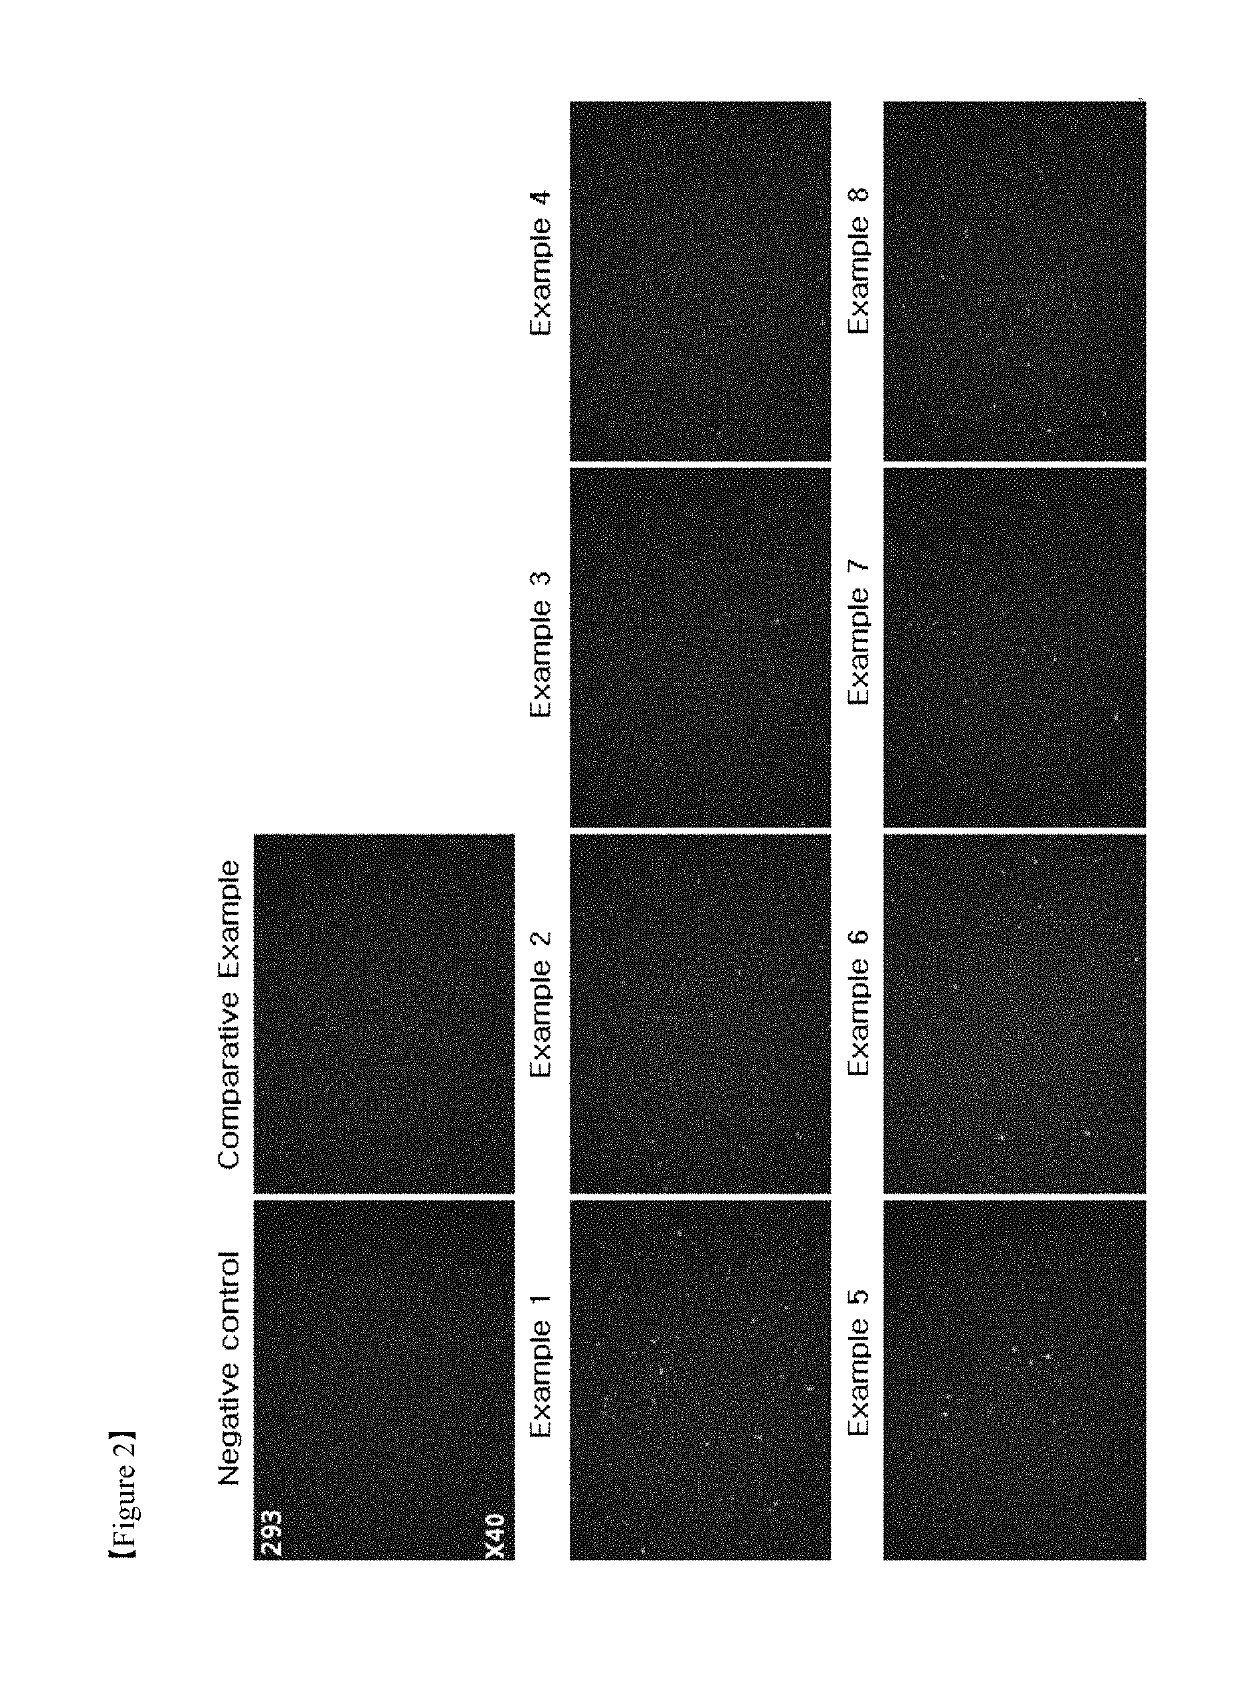 Polymer nanoparticle composition for plasmid DNA delivery, and preparation method therefor